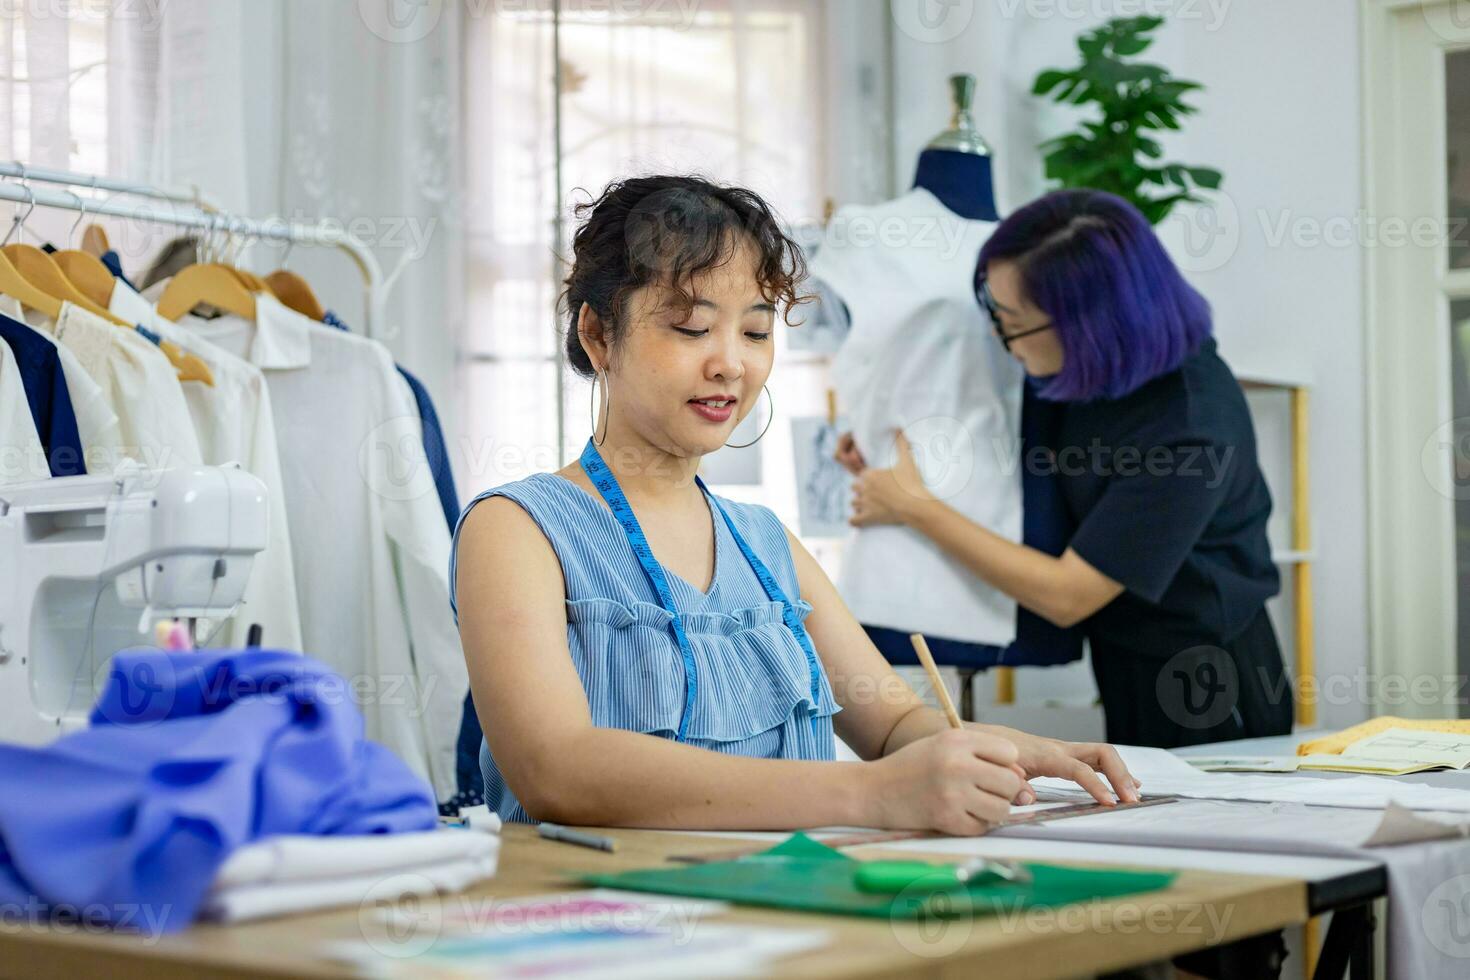 Fashionable freelance dressmaker is designing on new dress by drawing illustrator while working in artistic workshop studio for fashion design and clothing business industry photo